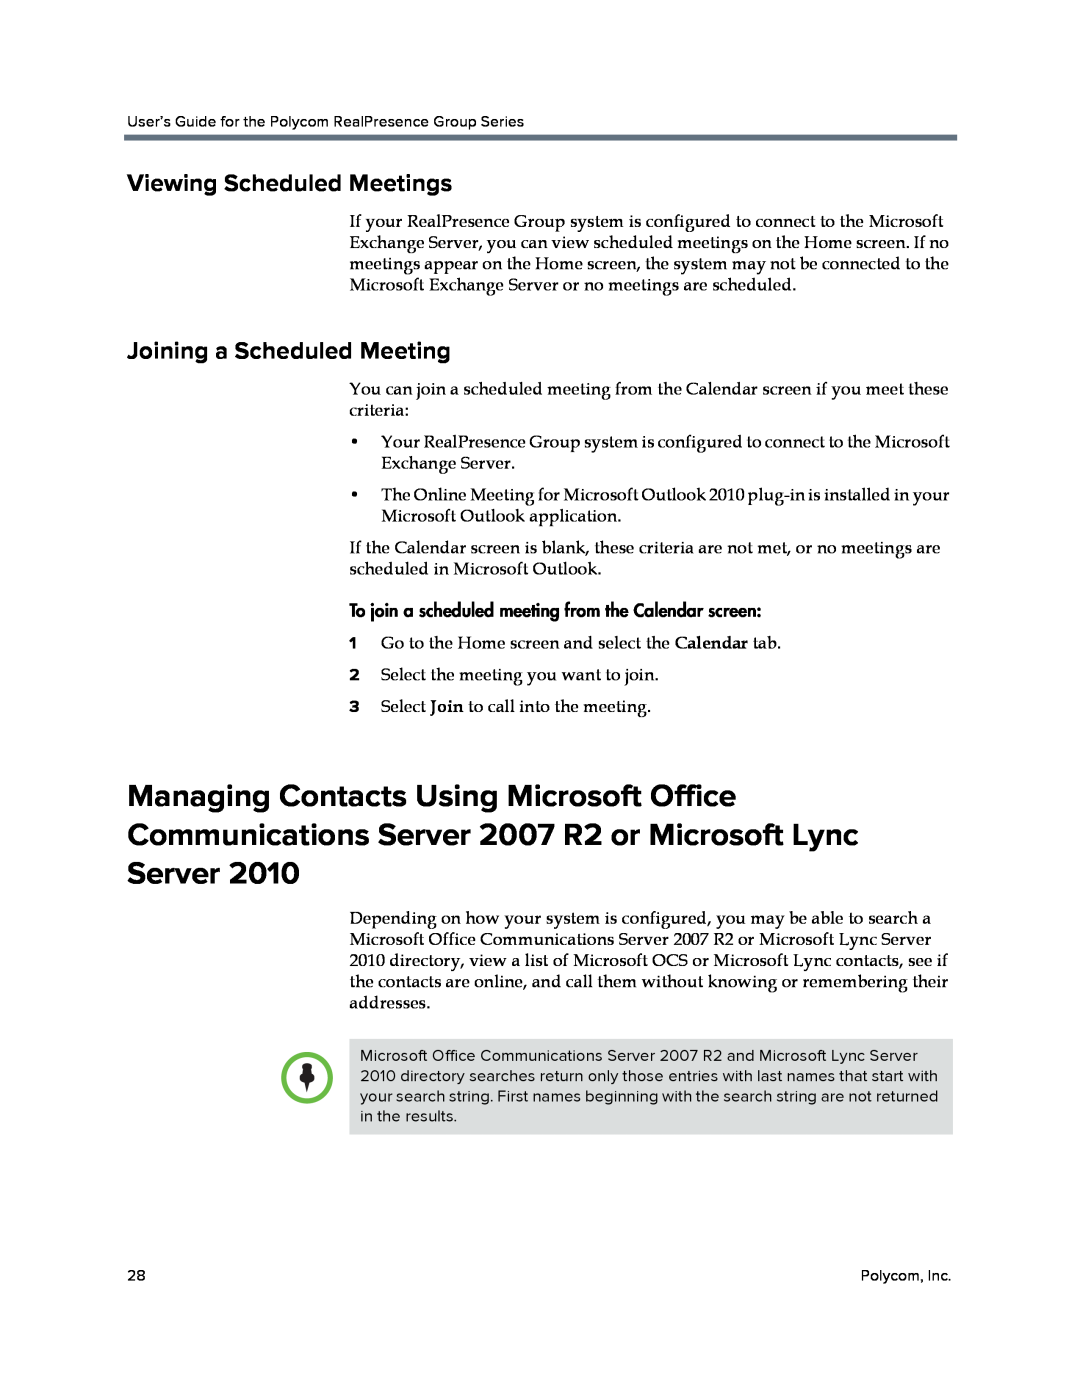 Polycom P001 Viewing Scheduled Meetings, Joining a Scheduled Meeting, To join a scheduled meeting from the Calendar screen 